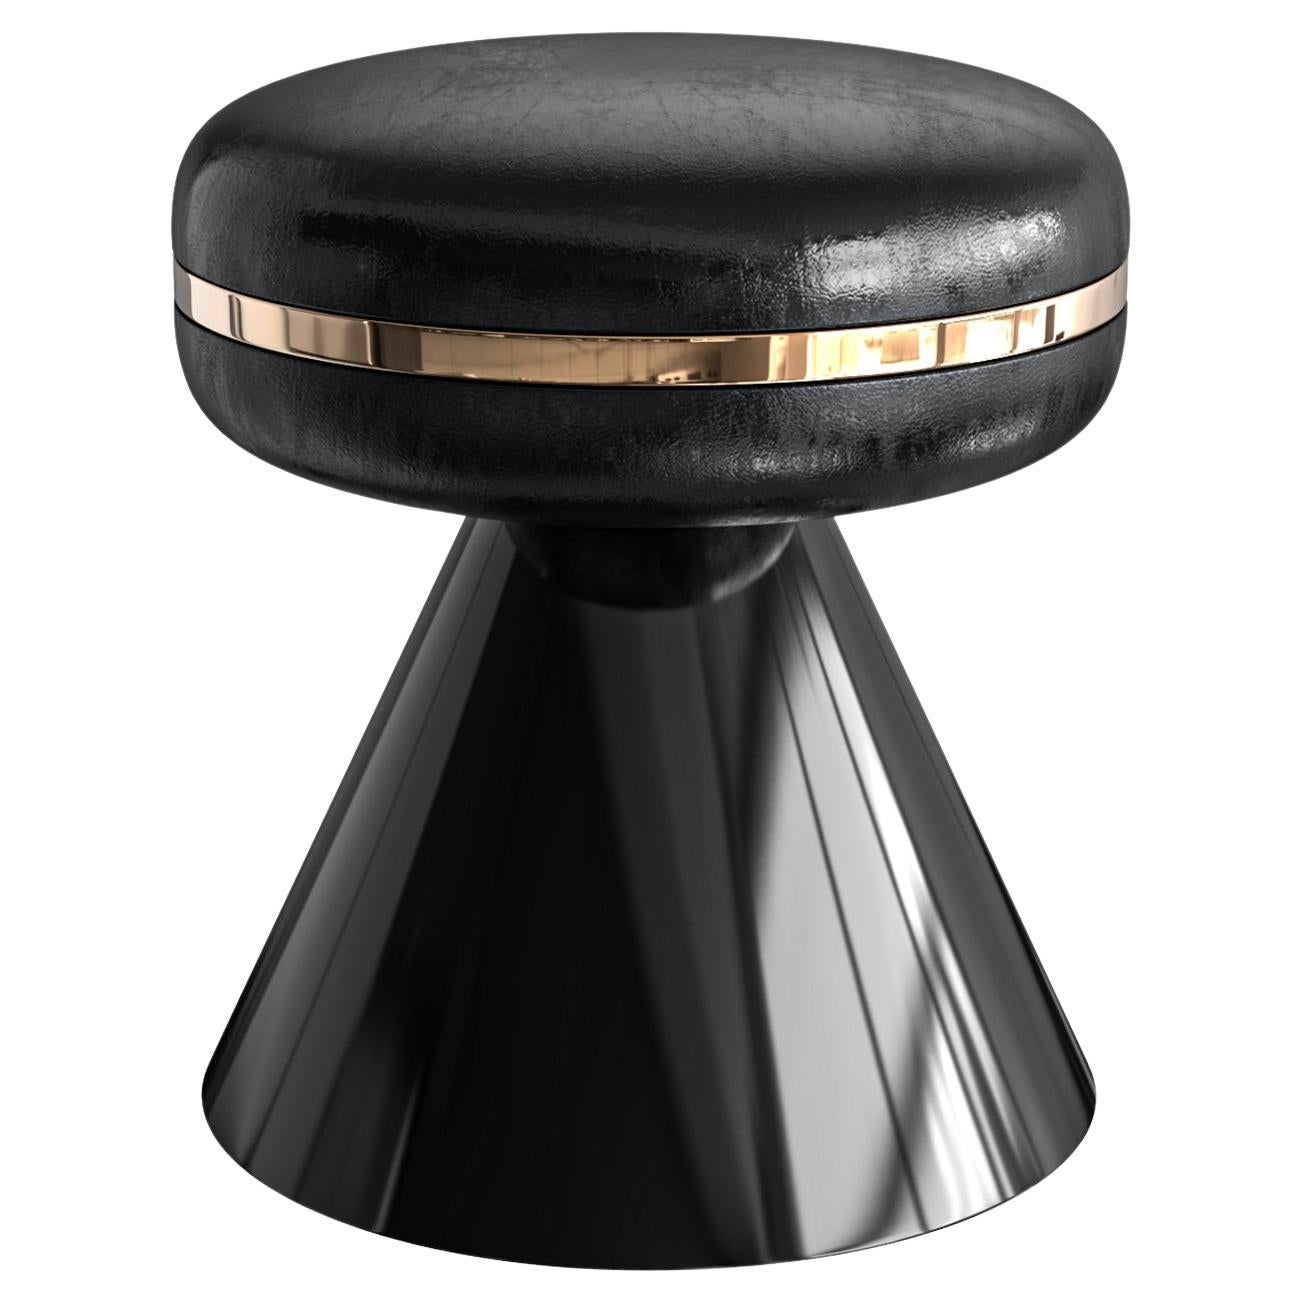 "Coraggioso" Ottoman & Pouf with Stainless Steel and Bronze Details, Istanbul For Sale